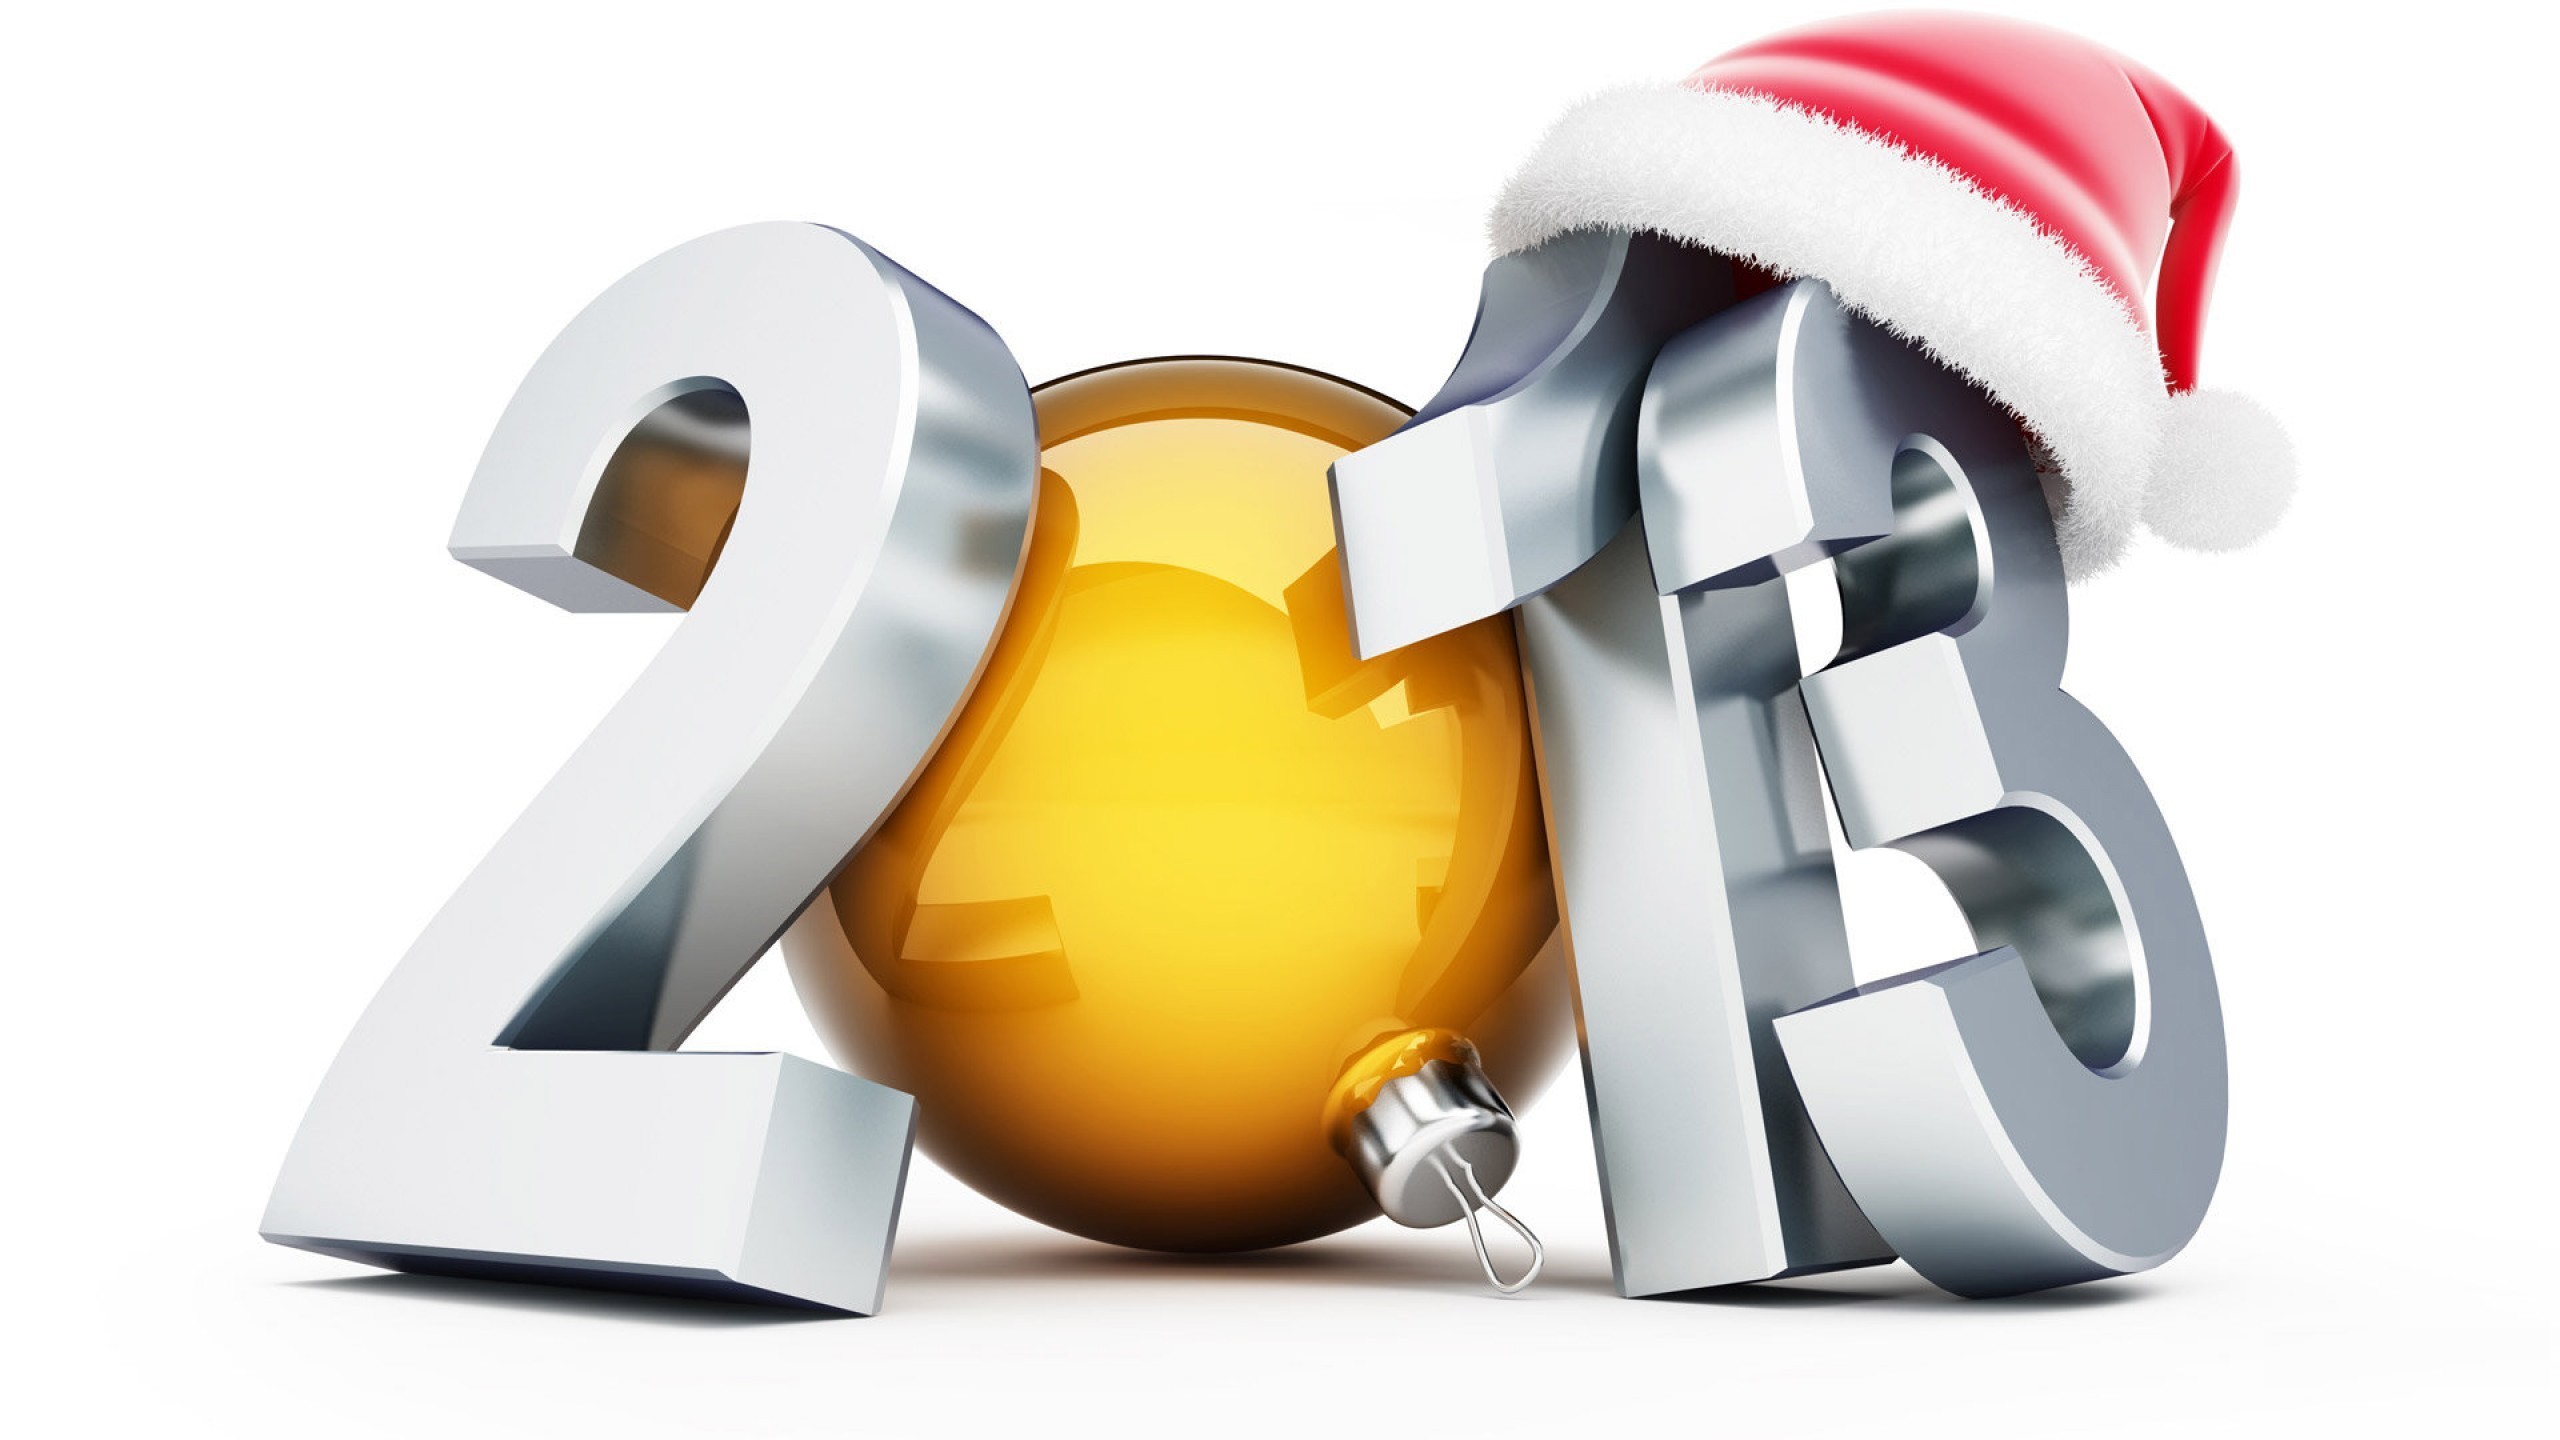 Holiday New Year 2013 2560x1440